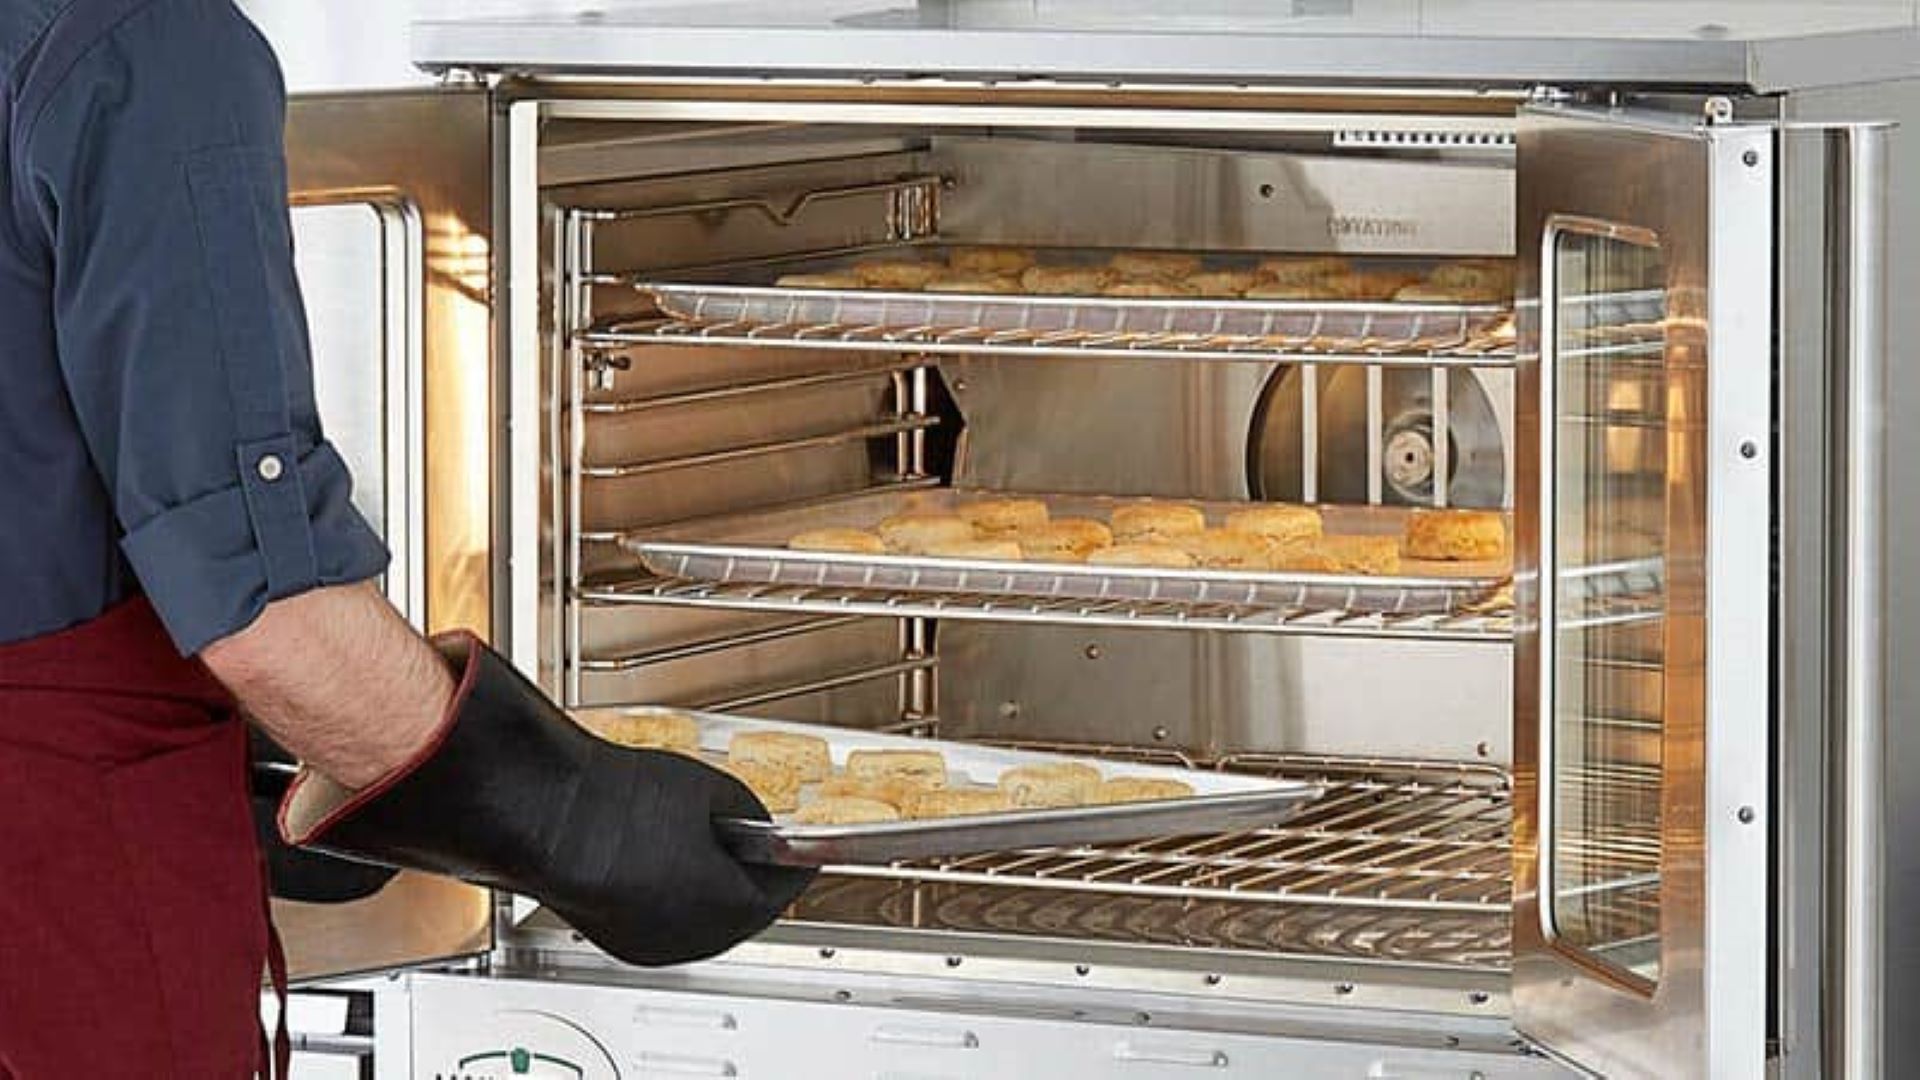 Fan Oven vs Conventional Oven